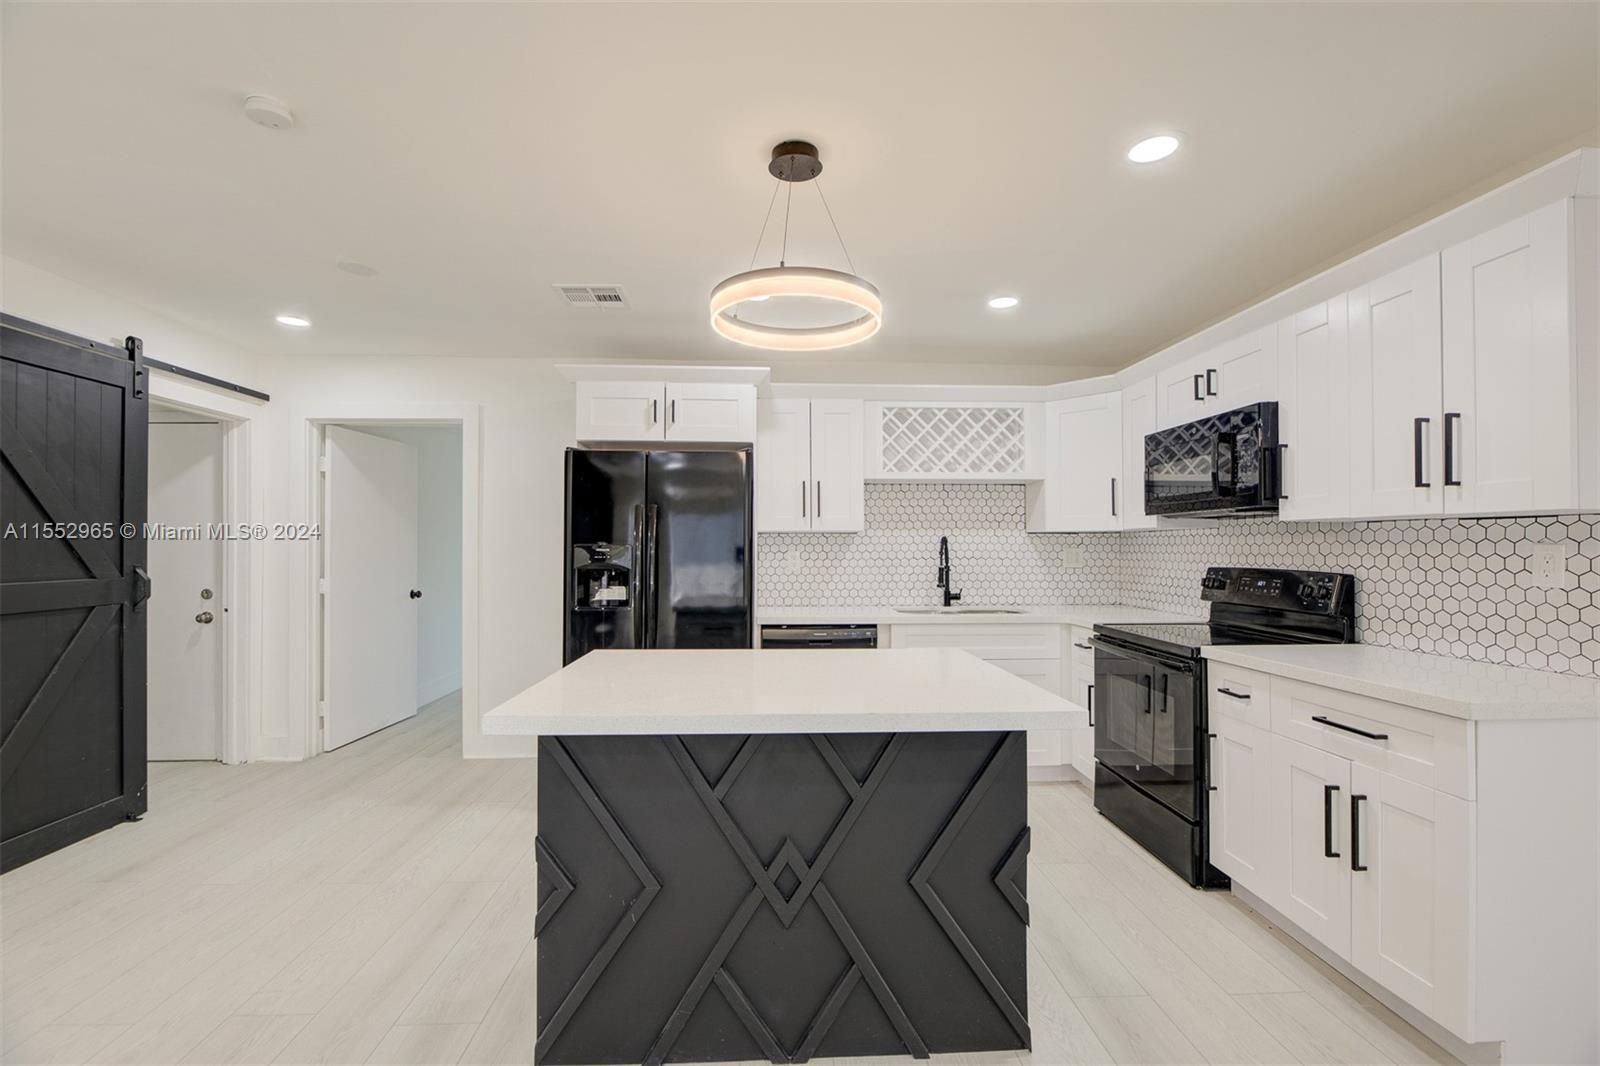 a large kitchen with stainless steel appliances kitchen island granite countertop a refrigerator a sink dishwasher and white cabinets with wooden floor